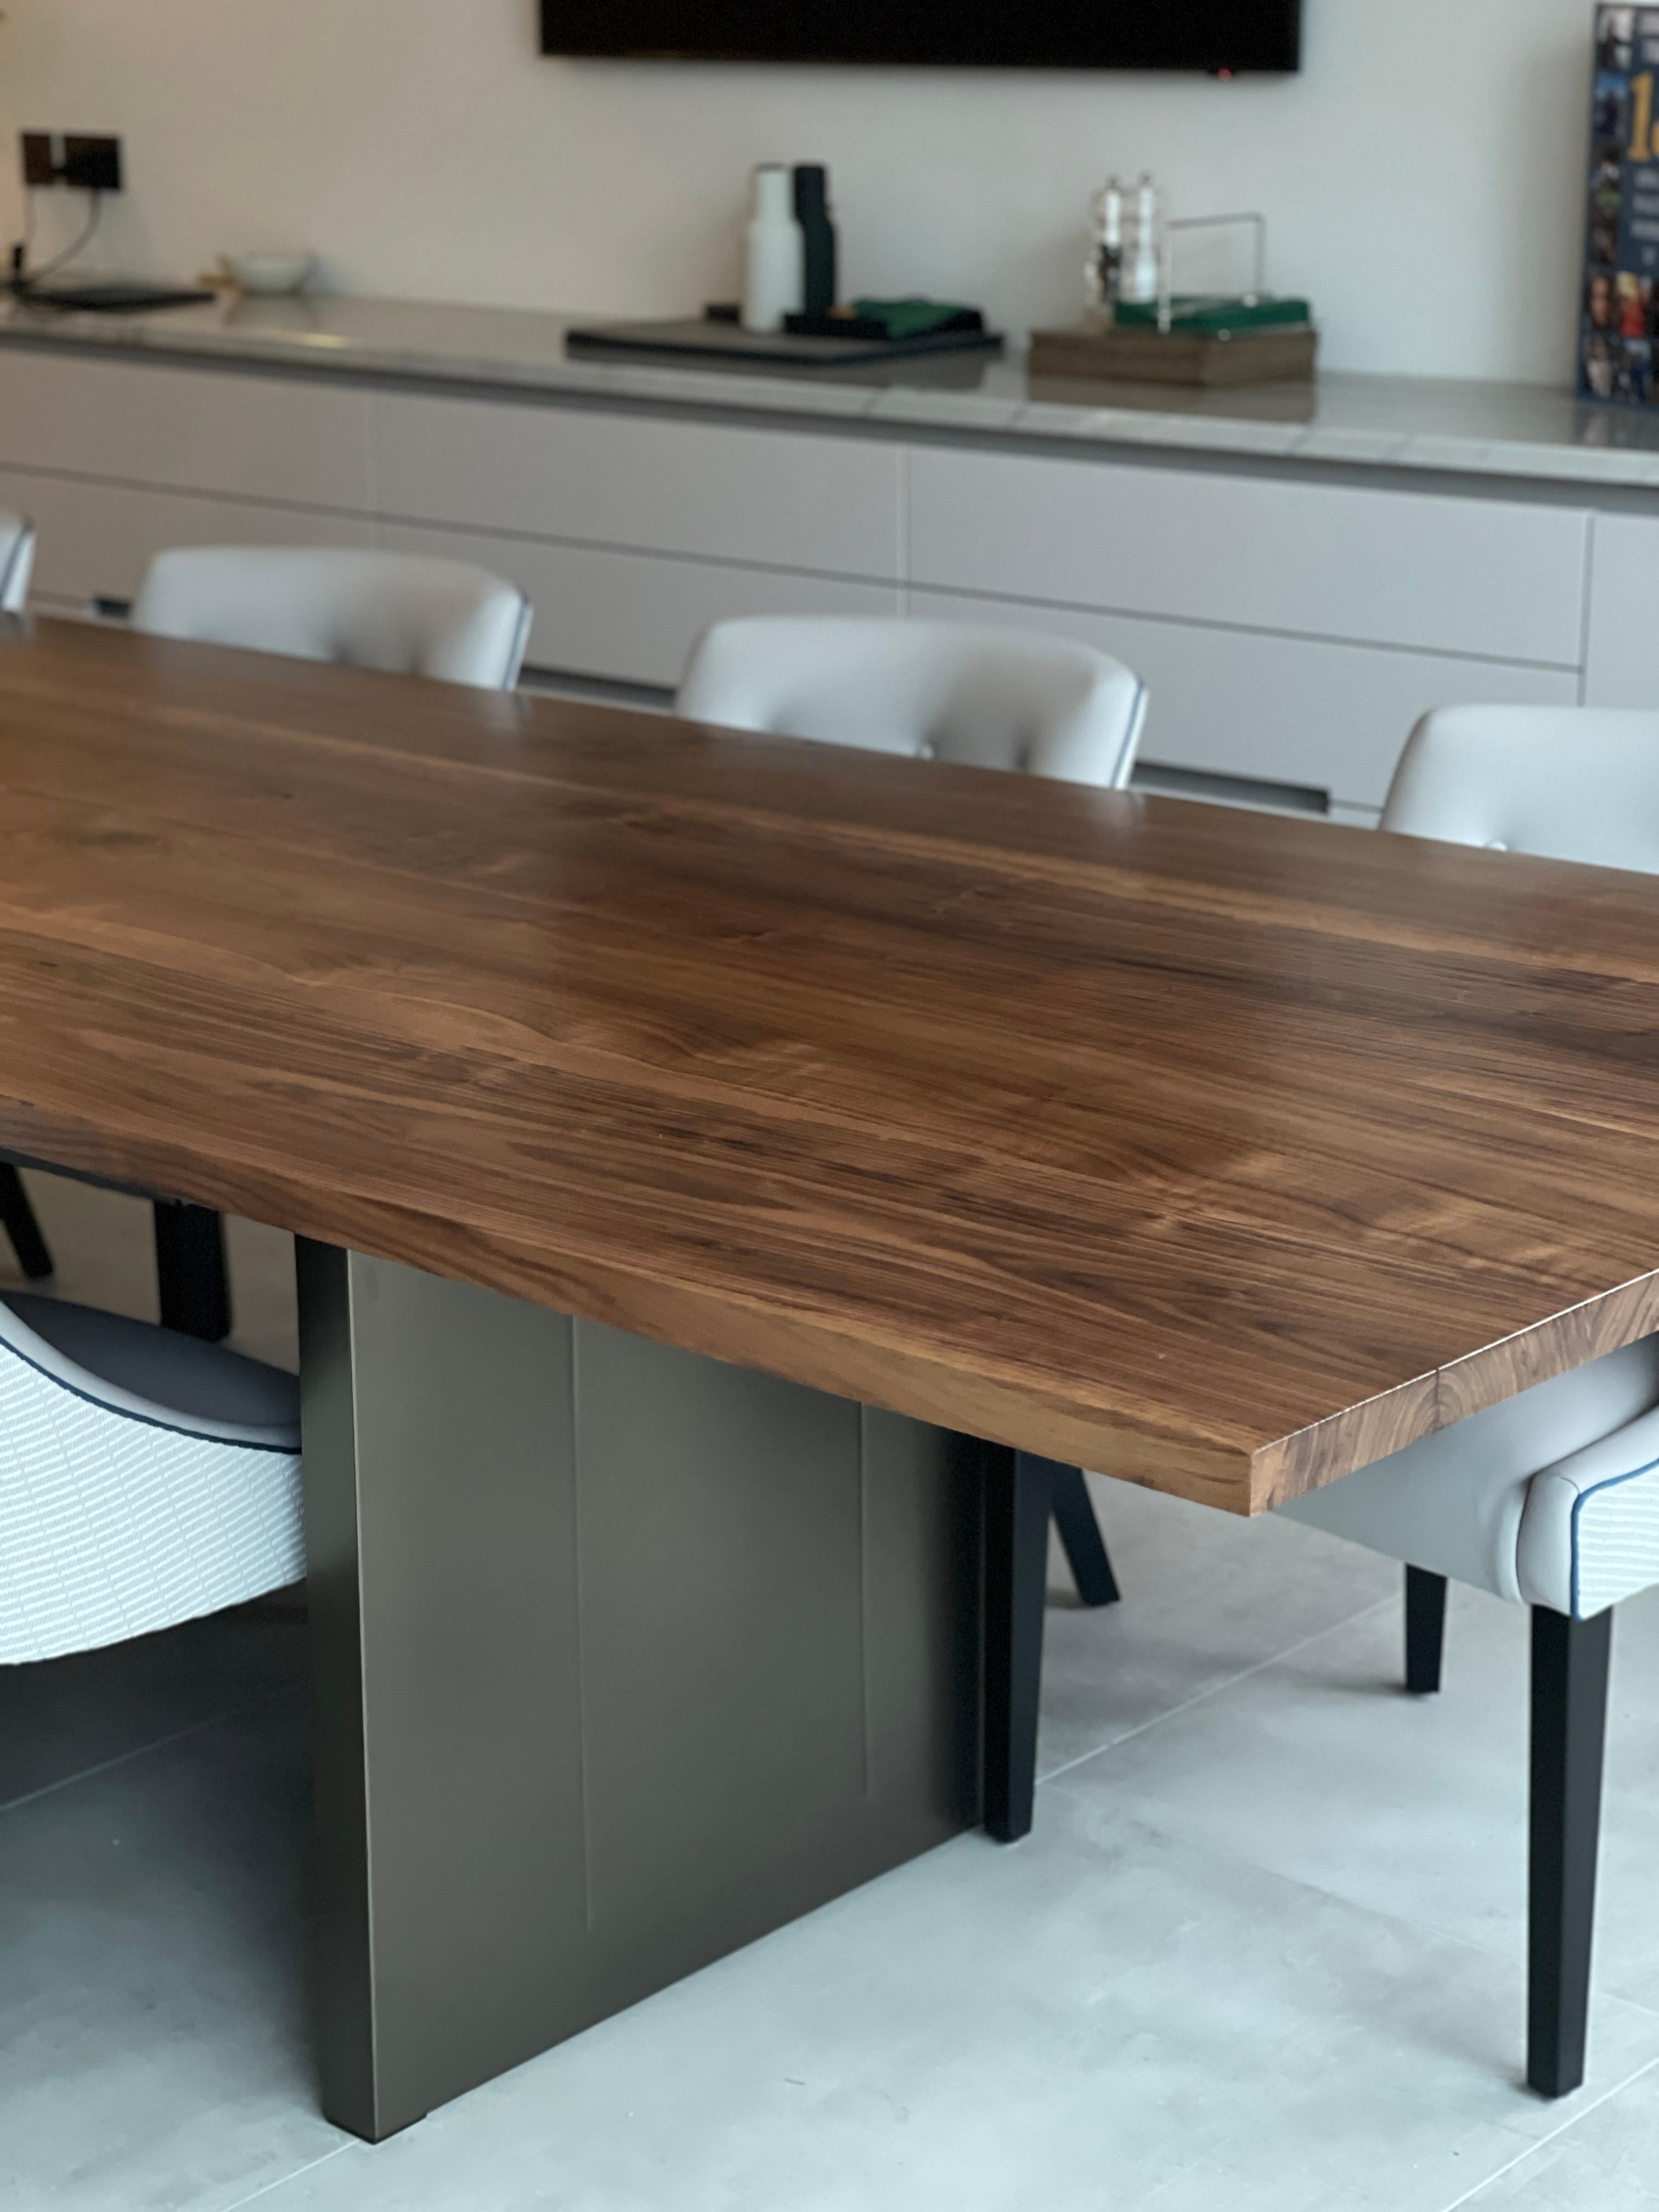 Here you have a 1/1 American Walnut dining table on custom steel etched panel legs that are powder coated bronze.
Photographed so you can see it in situ.

Finished in a very subtle but hard wearing super matte lacquer.

Every item is made-to-order